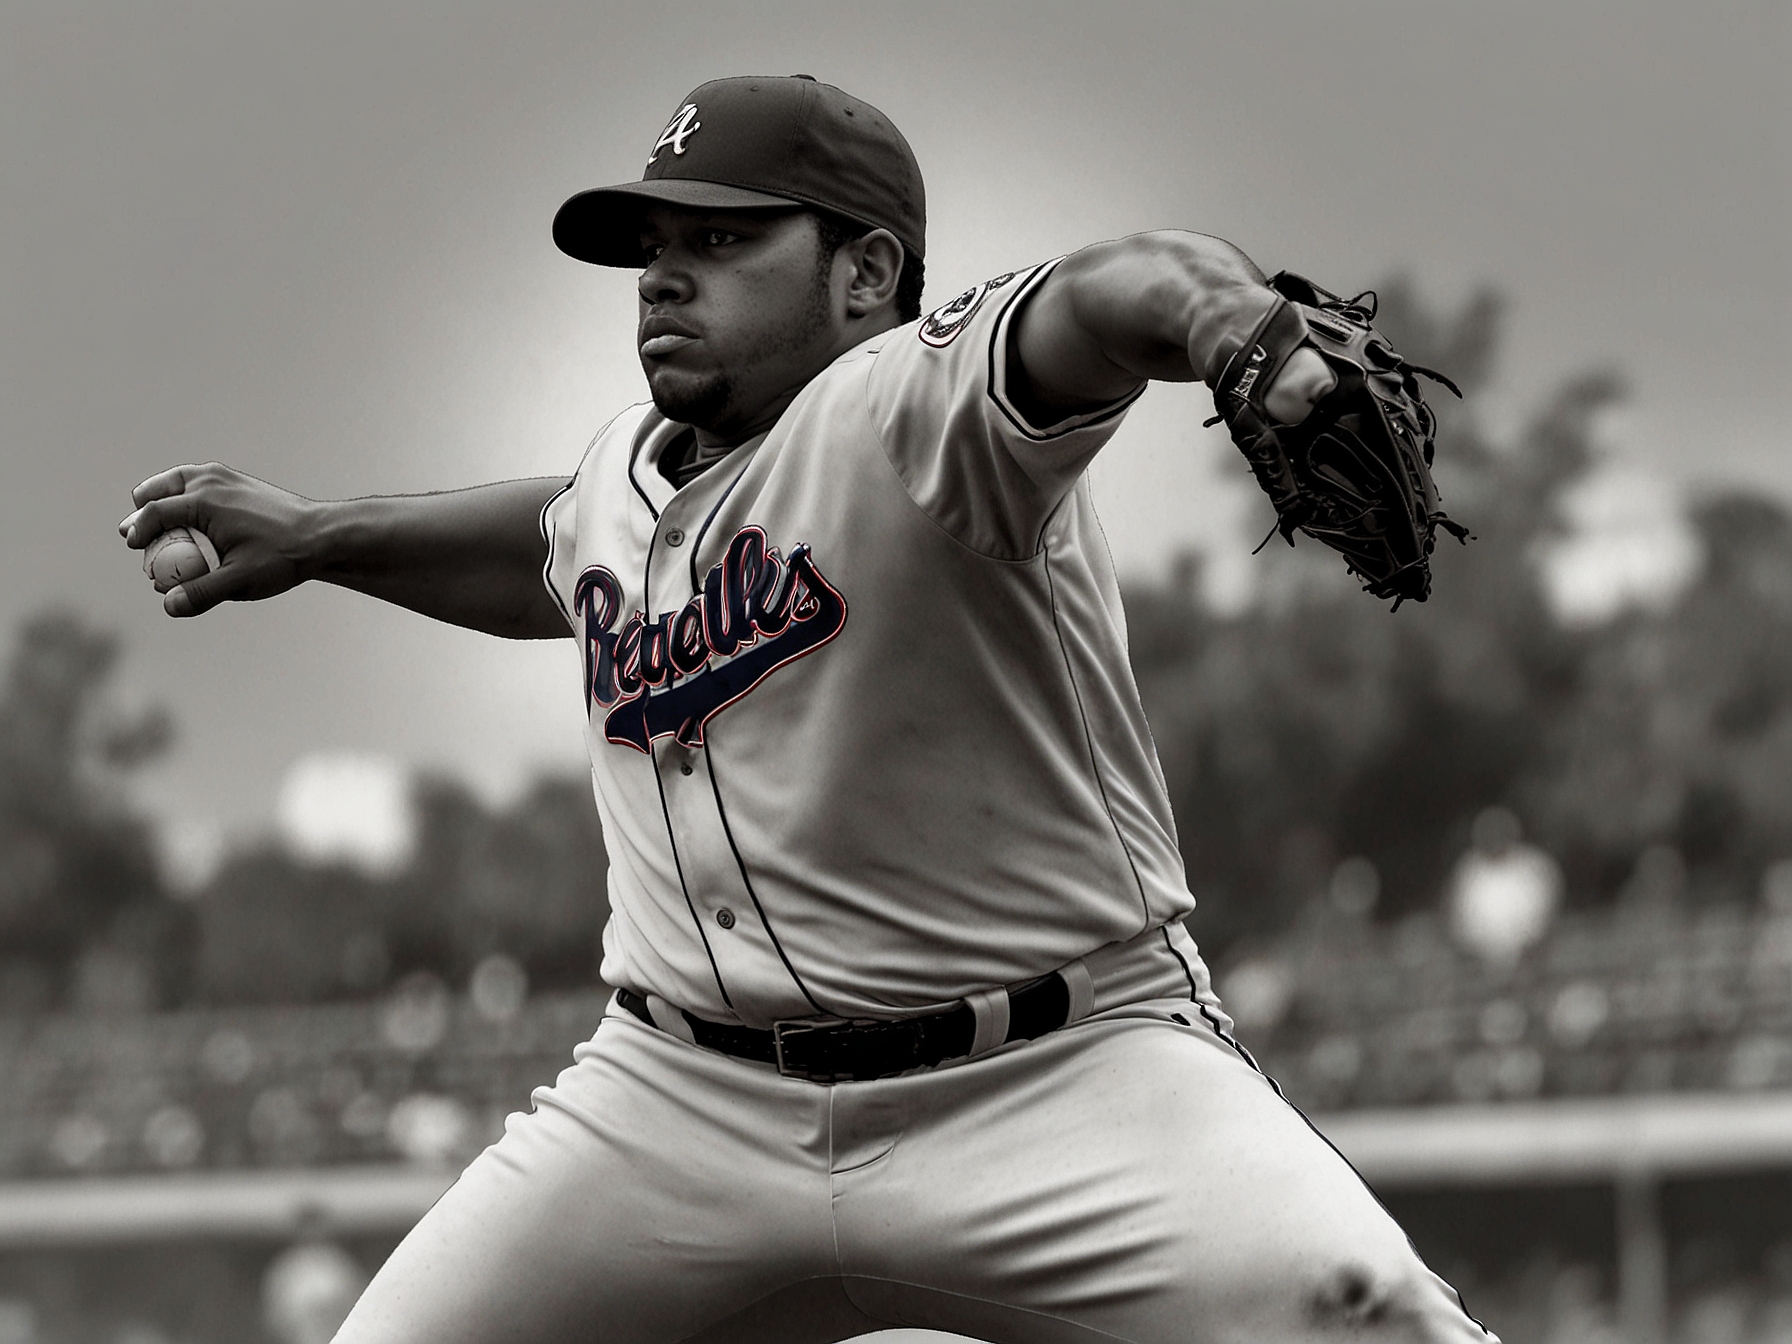 Yoendrys Gomez on the mound delivering a pitch, his focused expression and dynamic motion capturing the intensity of the critical game against the Atlanta Braves.